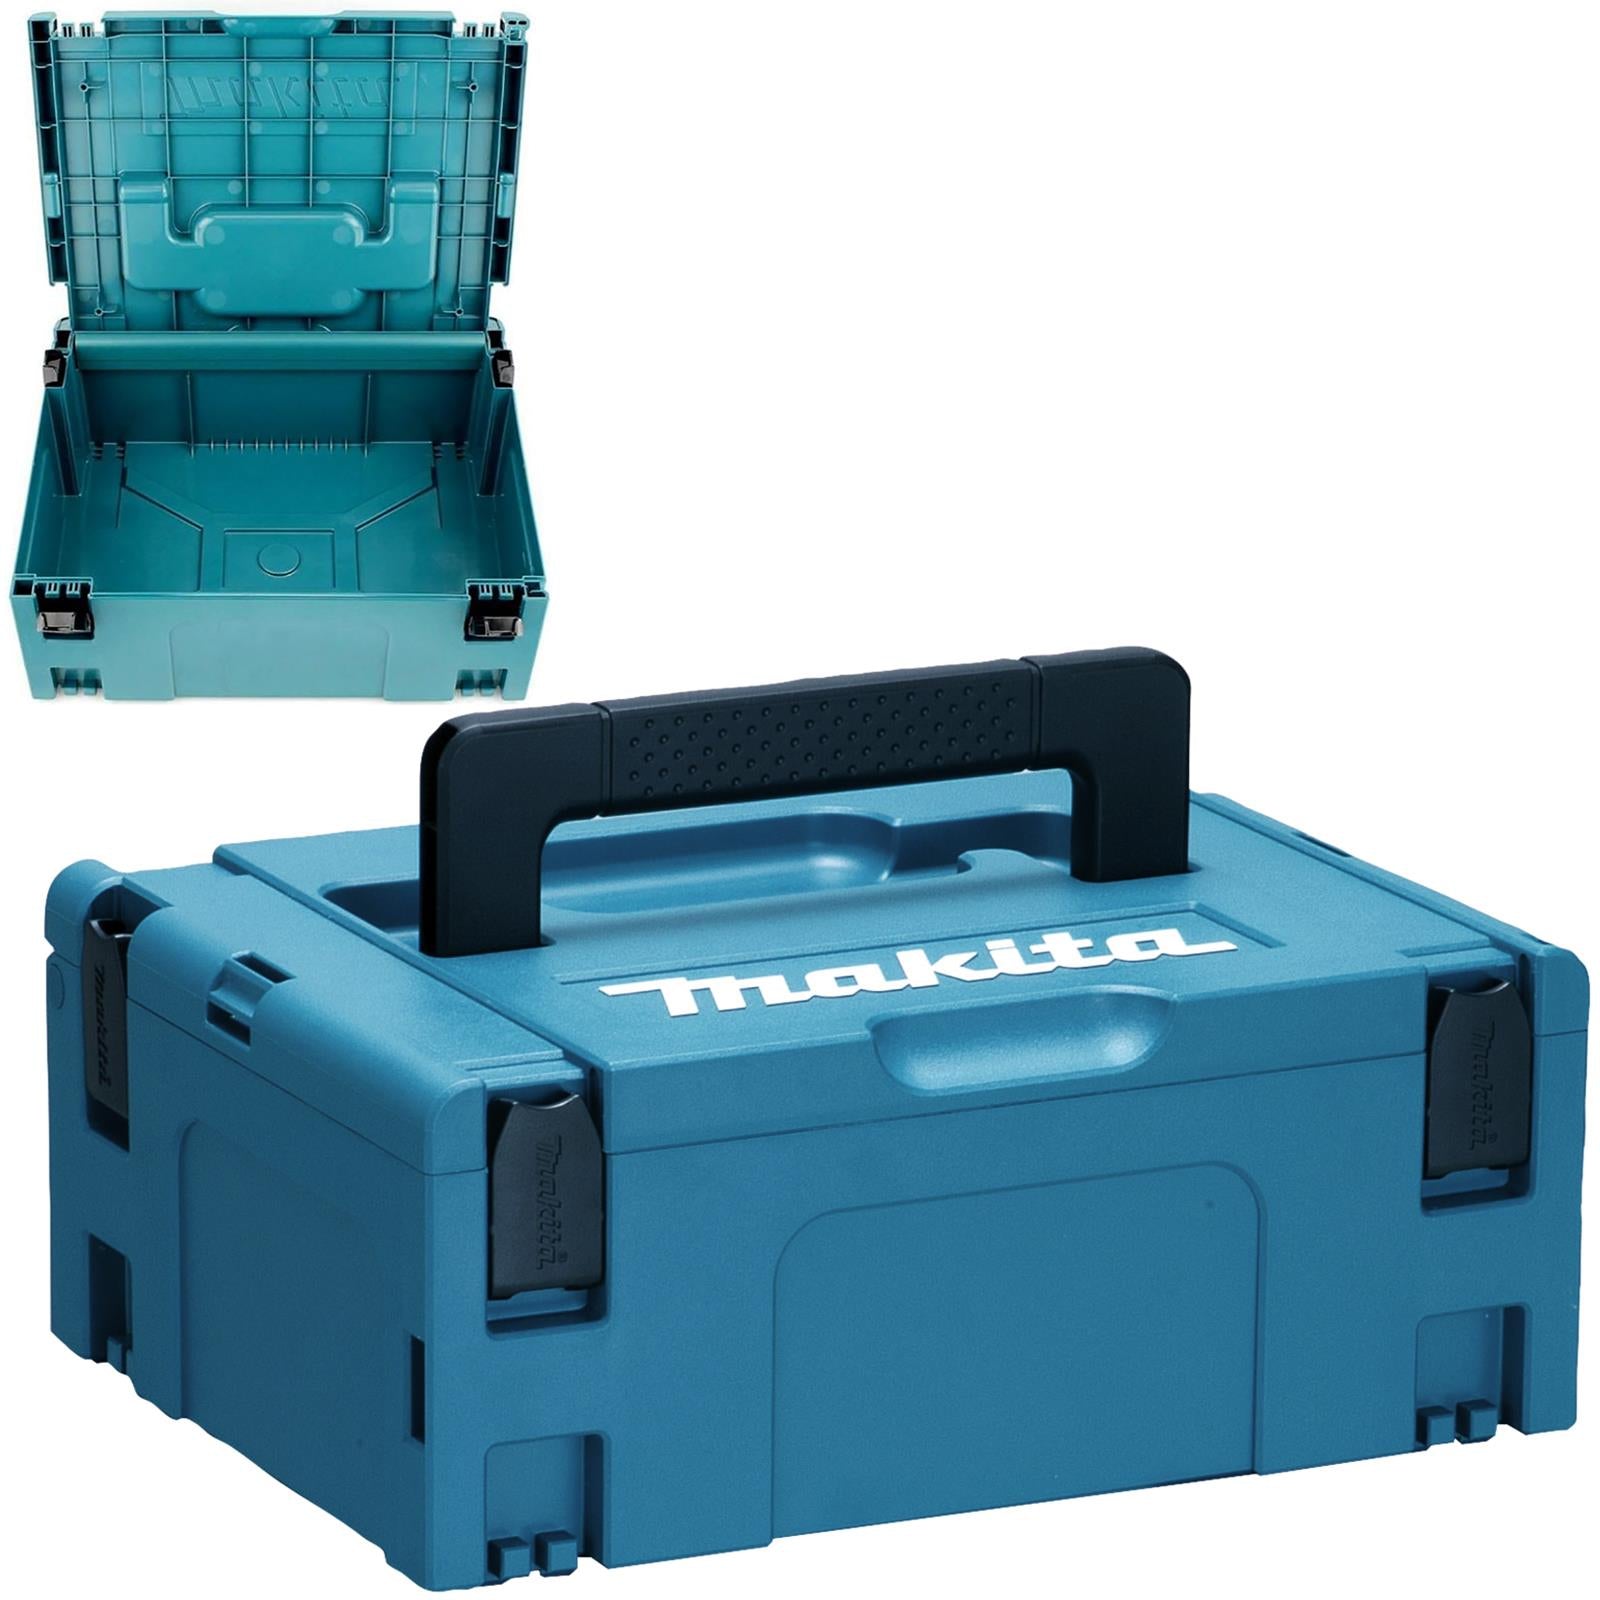 Makita Impact Wrench 1/2" Drive 18V LXT Brushless Li-ion 2 x 5Ah Charger Type 2 Case DTW300RTJ